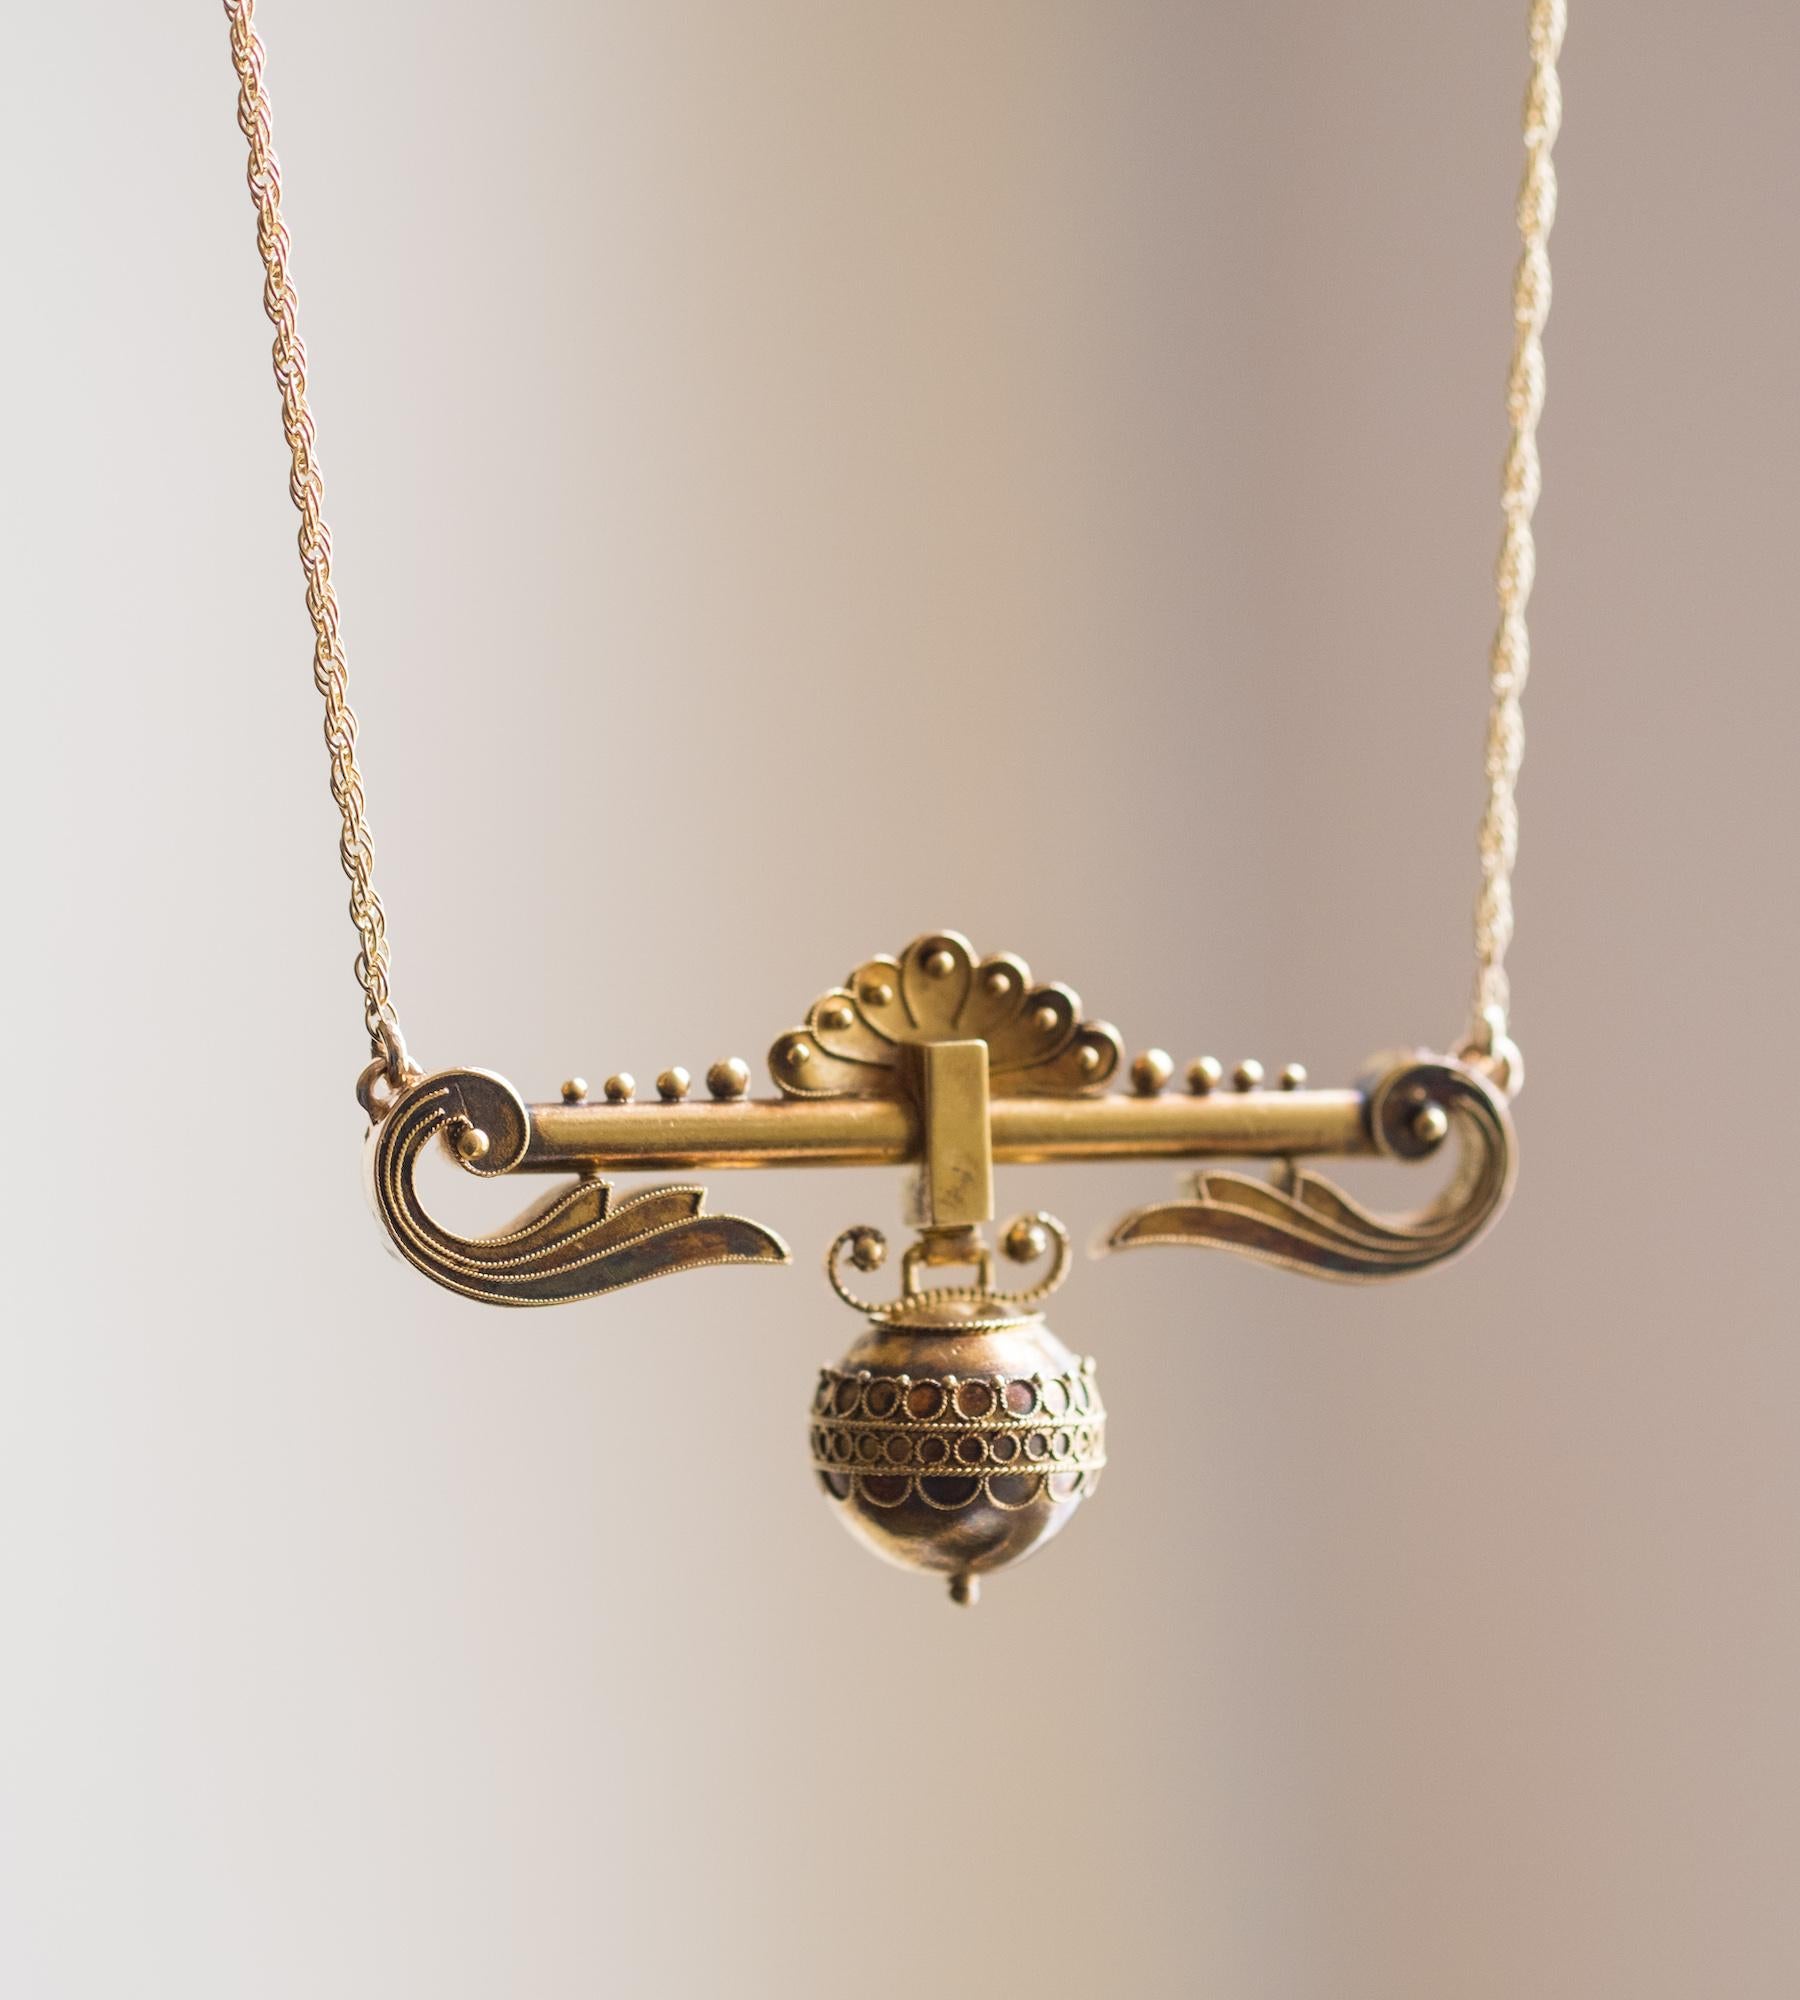 Our latest Fleur Fairfax transformation piece is a highly decorative gold necklace; a former brooch from the late 19th C. Re-imagined here on fixed gold chain, the design features a unique hanging sphere with ornamental filigree decoration. Gold